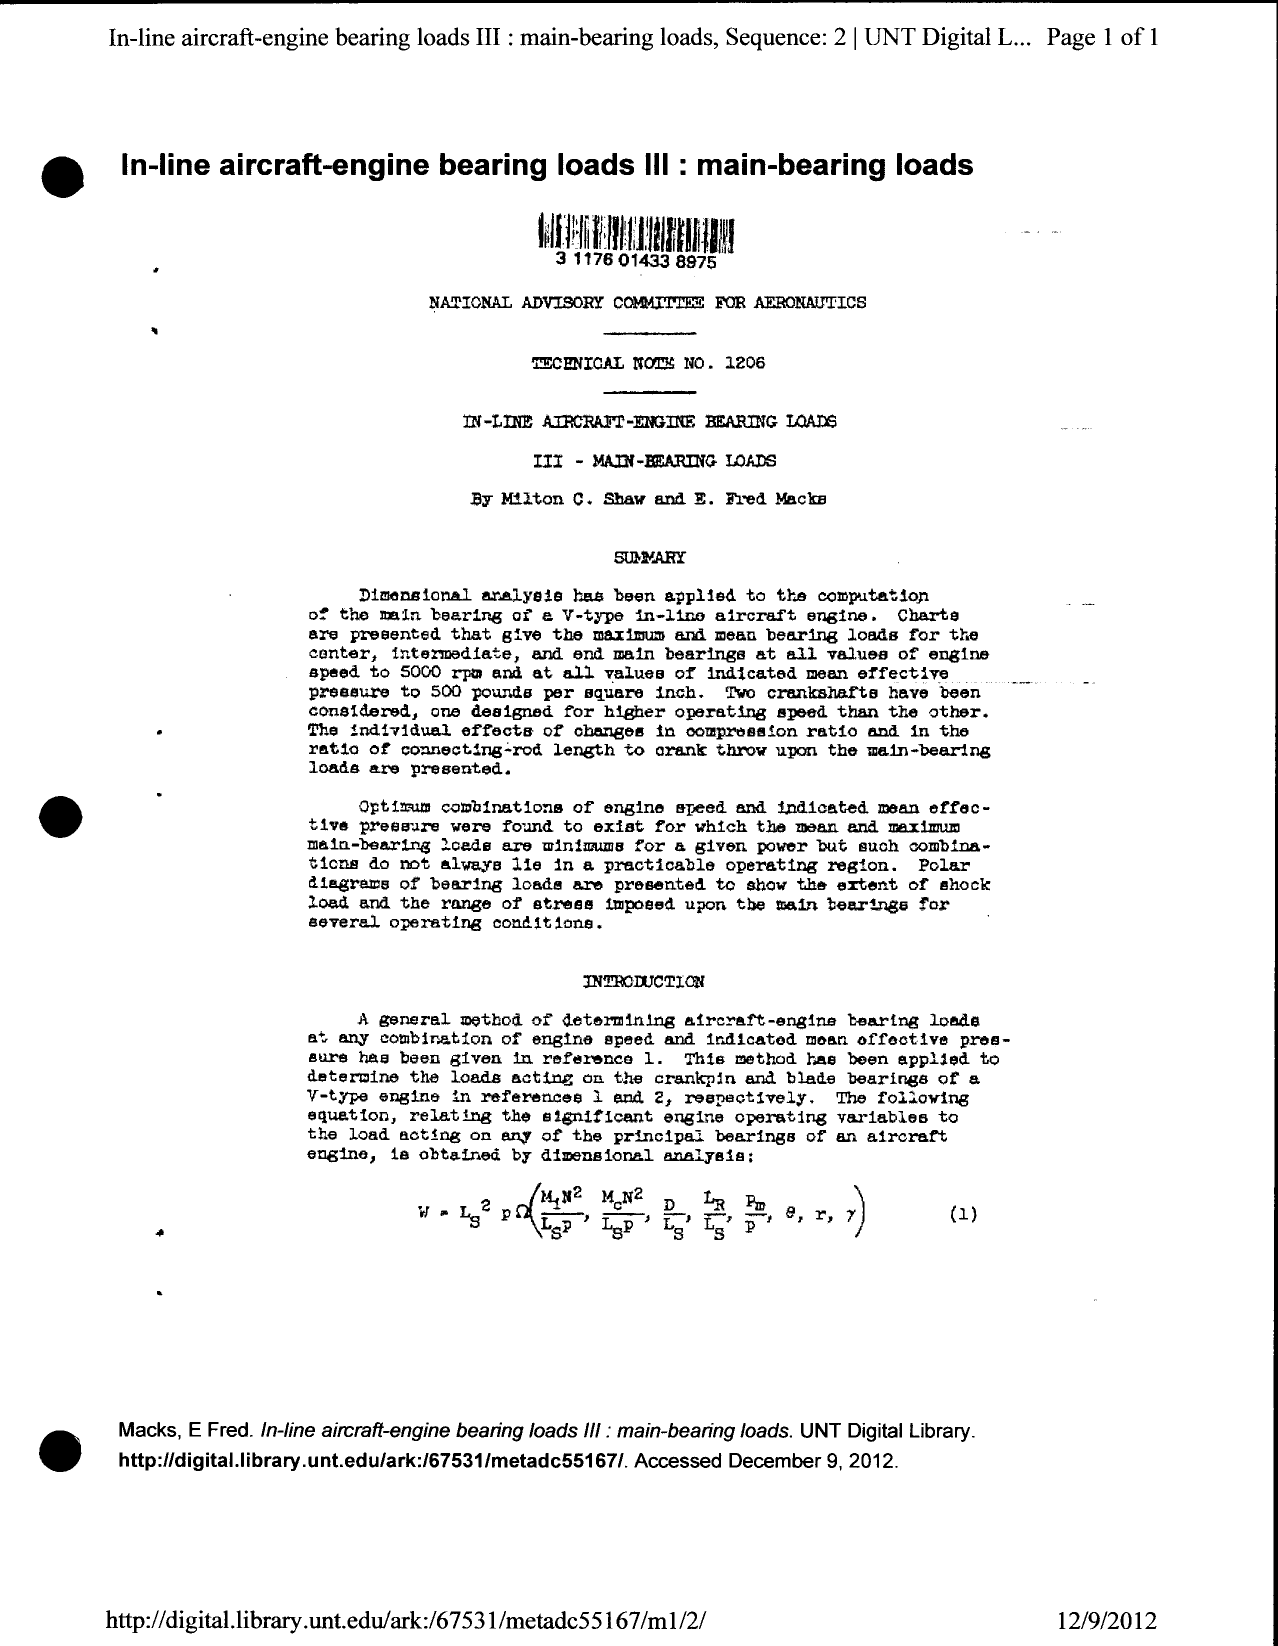 Sample page 2 from AirCorps Library document: In-Line Aircraft-Engine Bearing Loads